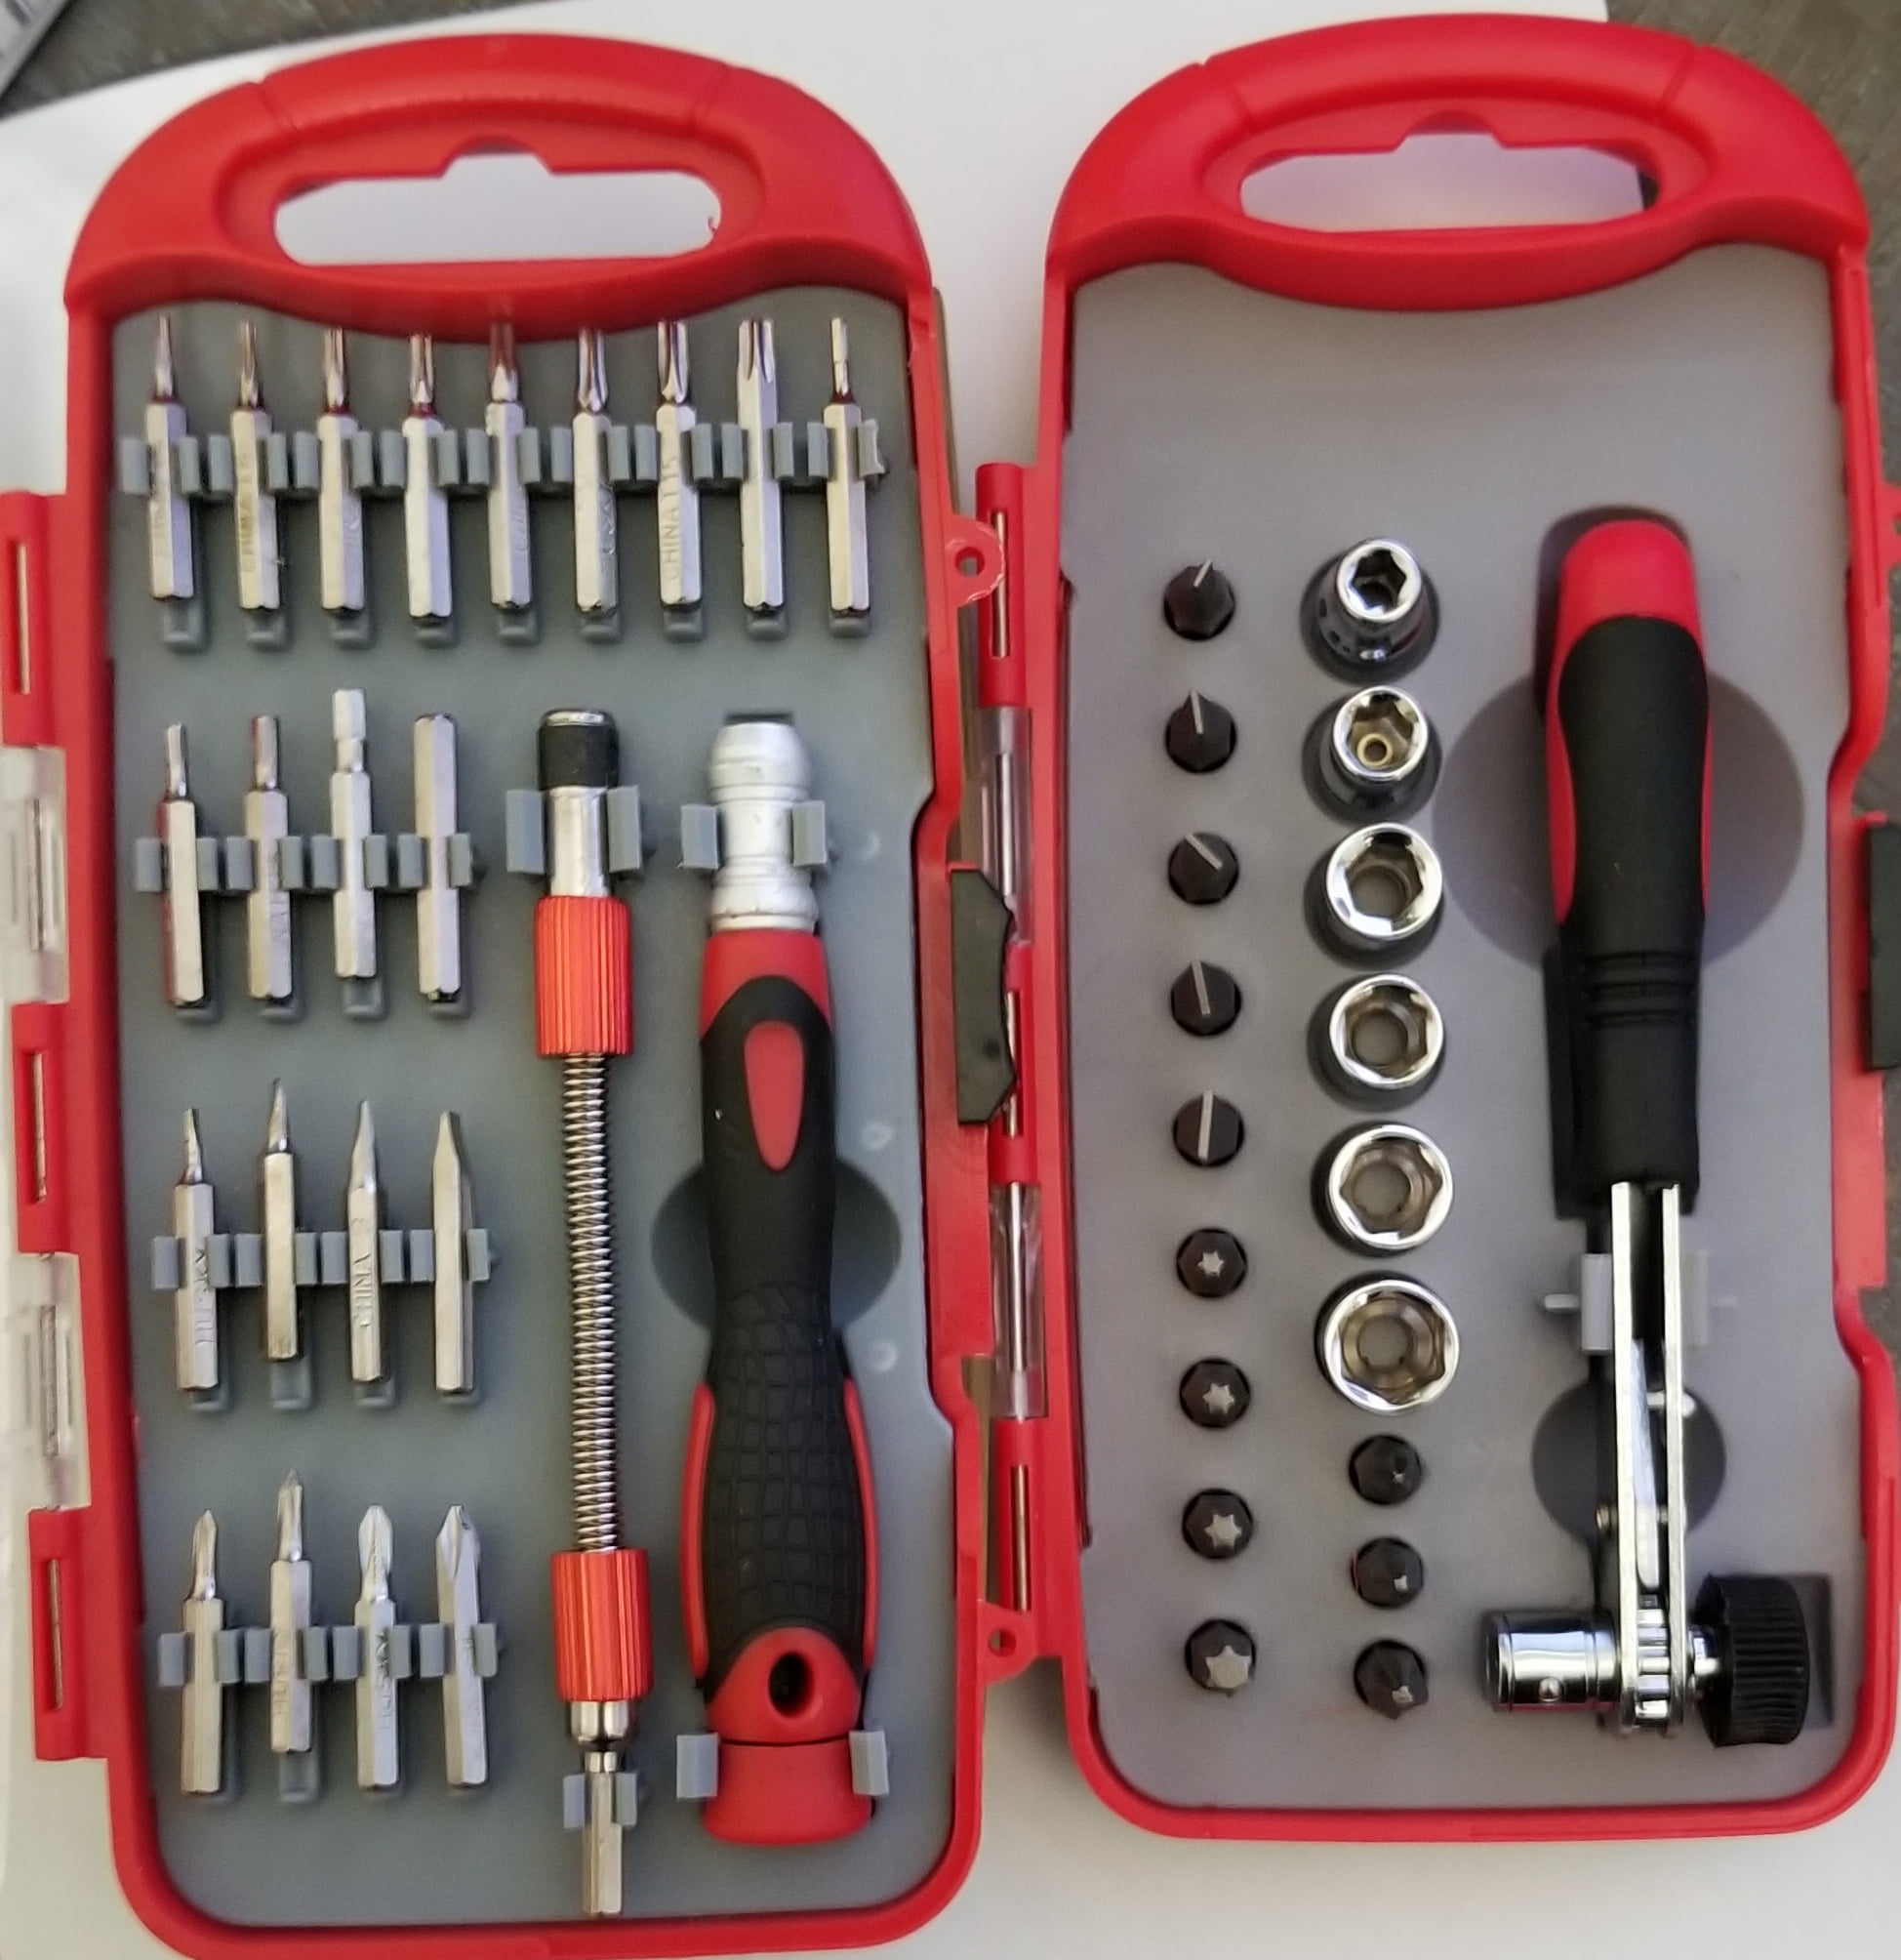 23Pcs Ratchet Screwdriver Bits Socket Tool Set with Phillips Slotted Hexagon and Torx 1/4 Inches Drive Reversible Drive Handle and Multi Bits Set for Repair Electrical Appliances Bicycle